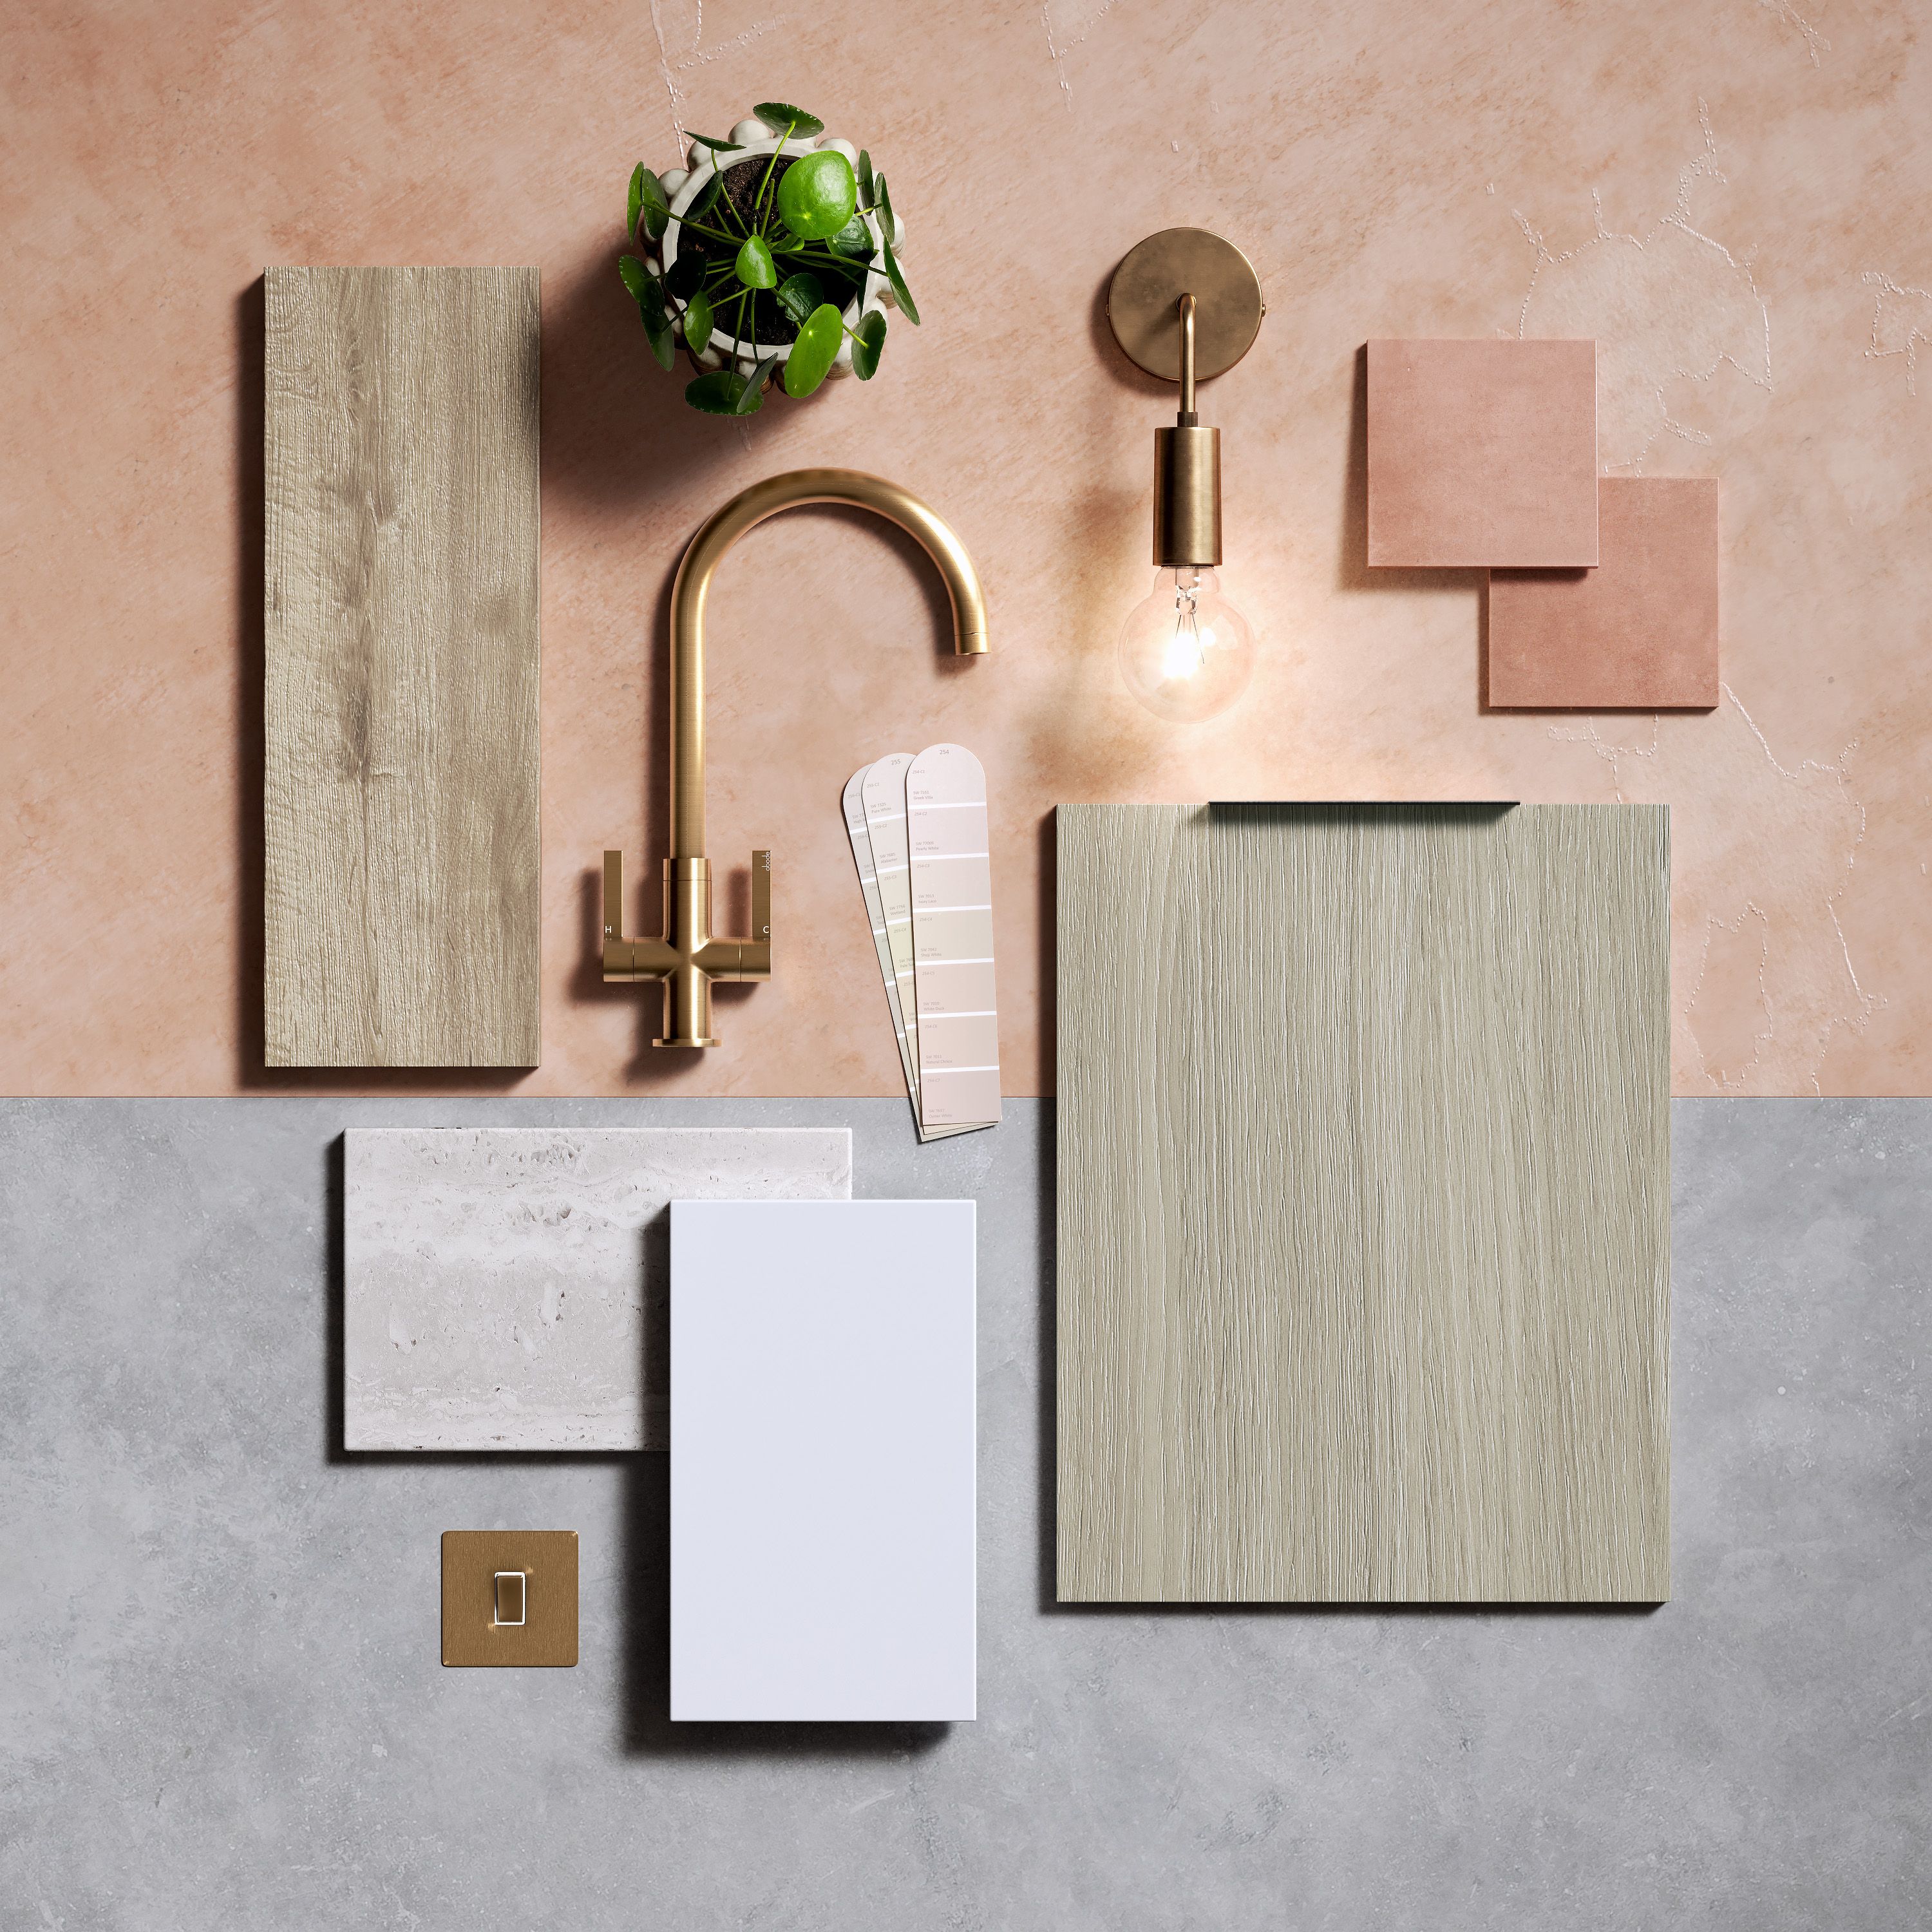 CGI flatlay image with white quartz worktop swatches, urban oak doors, brushed brass accessories and plastered walls with corresponding tiles.